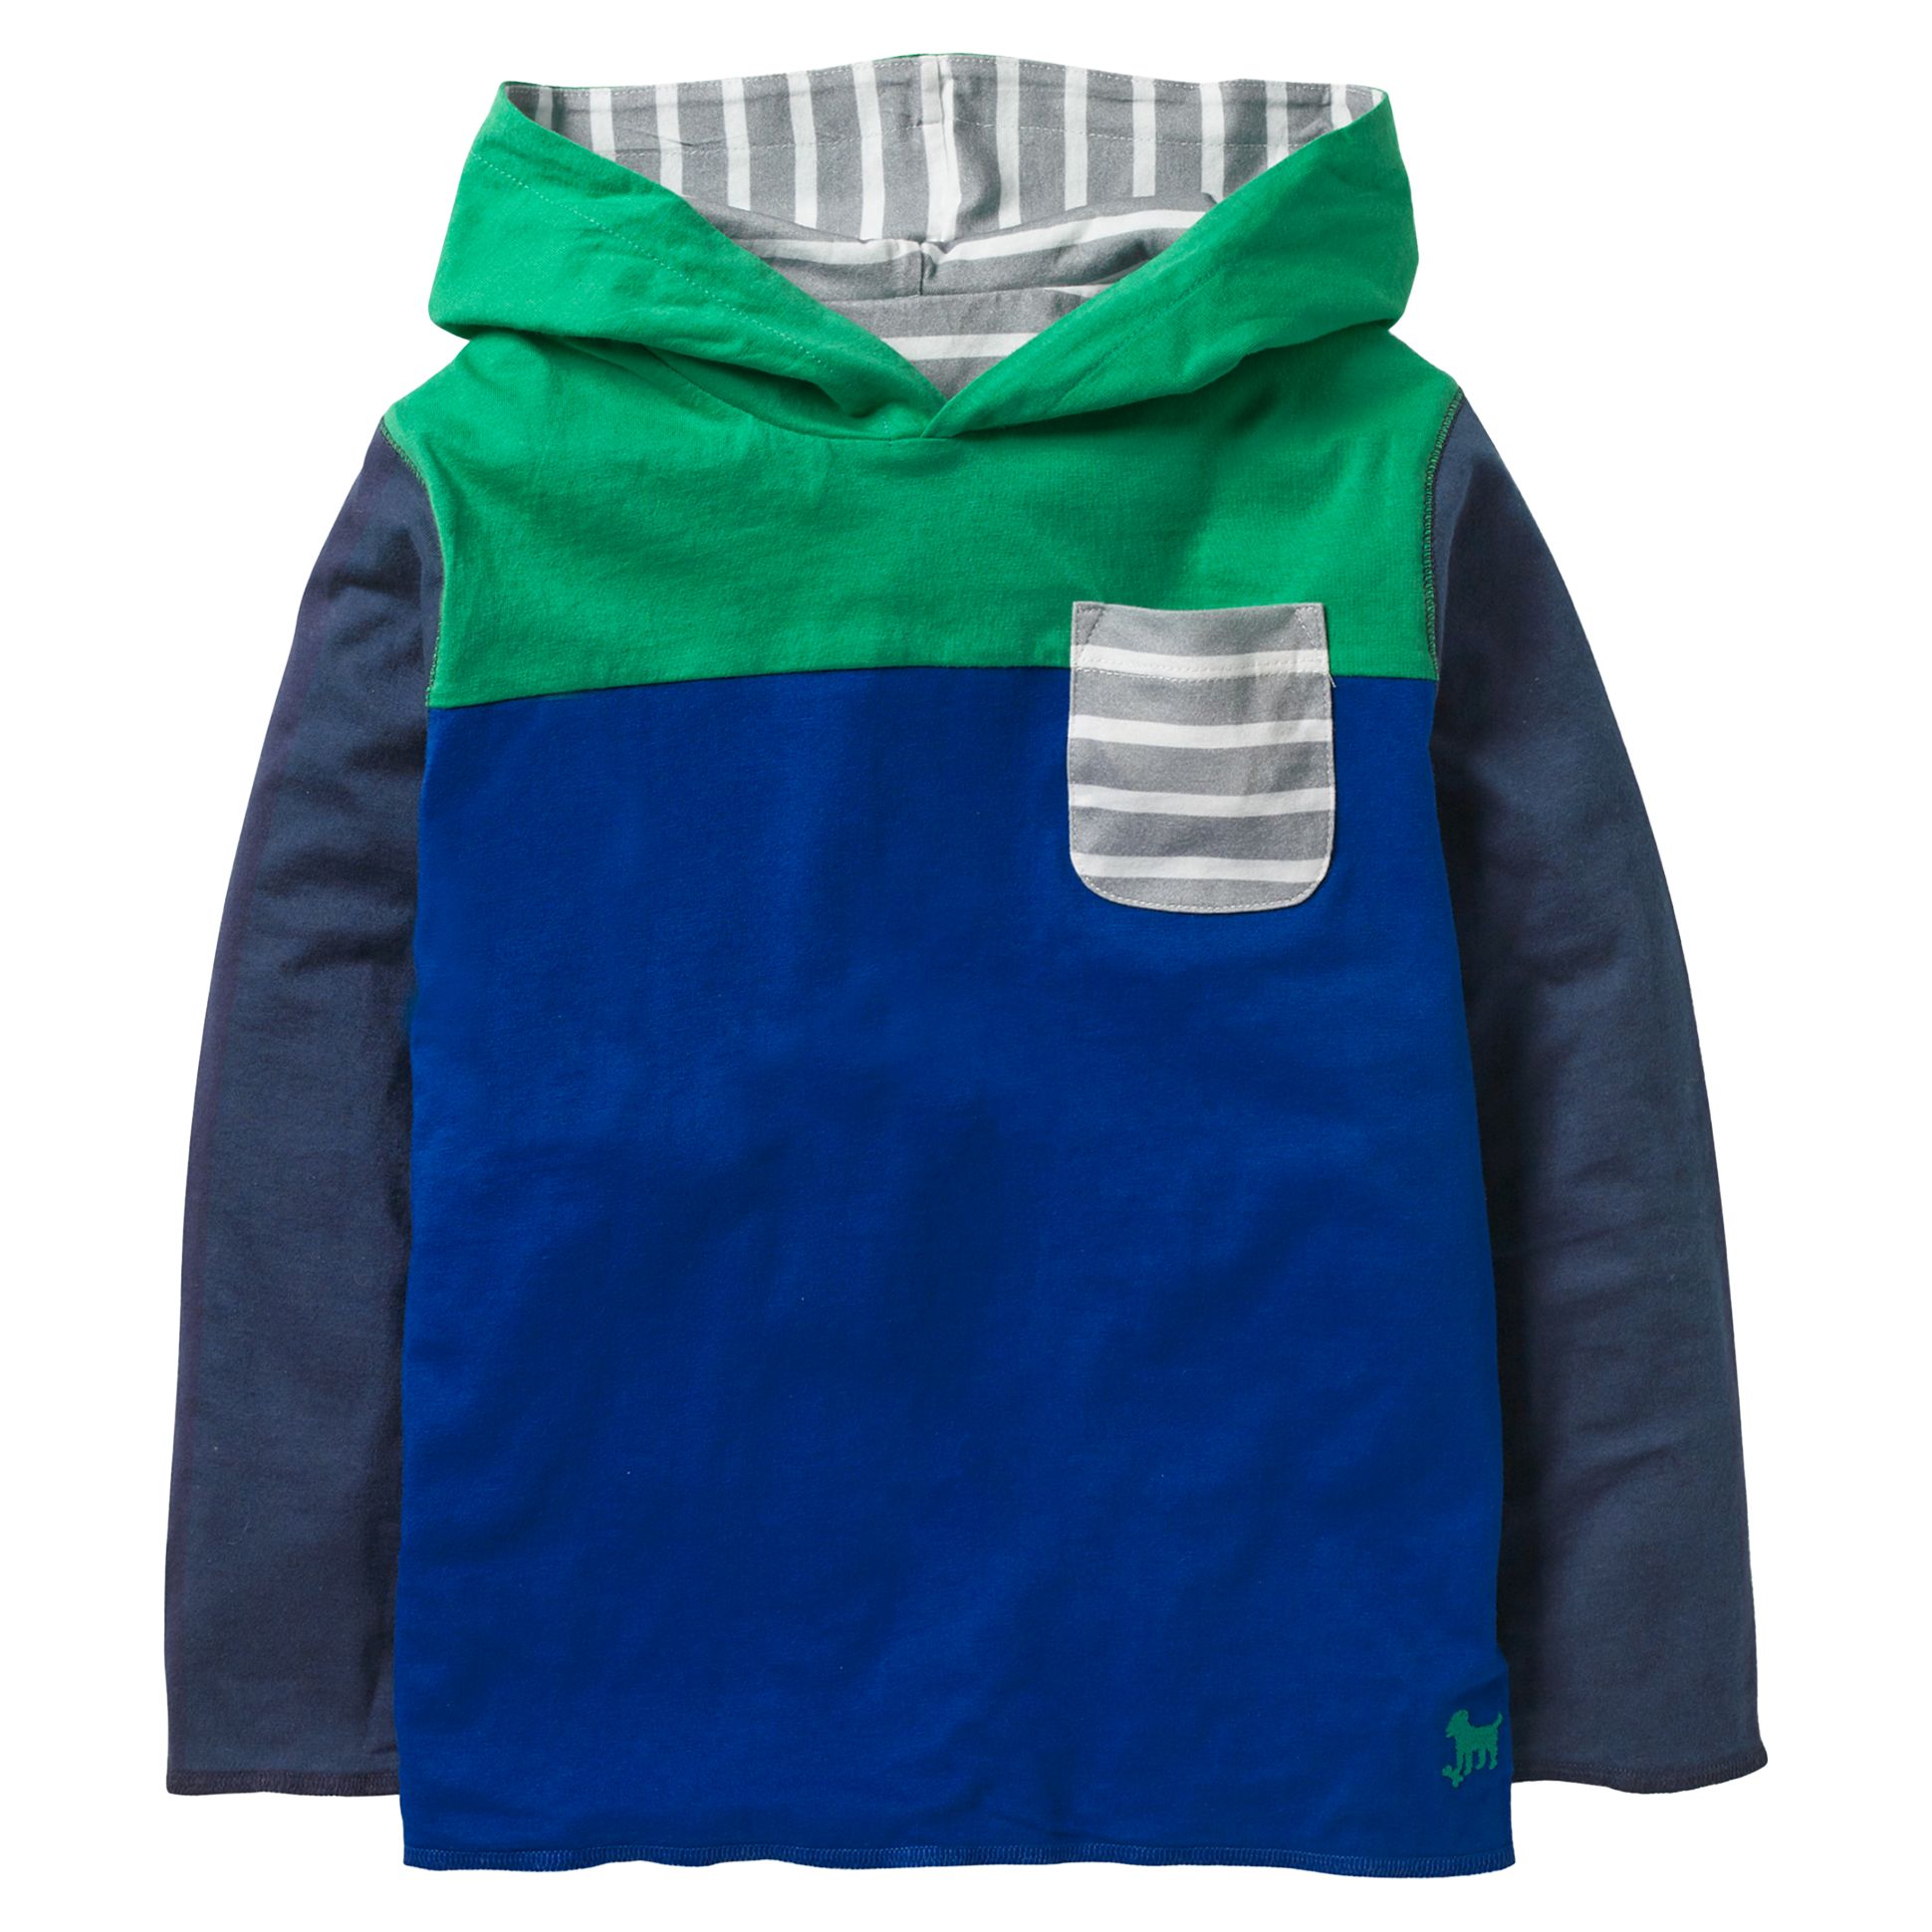 Mini Boden Boys' Reversible Hooded Top, Blue/Grey, 4-5 years